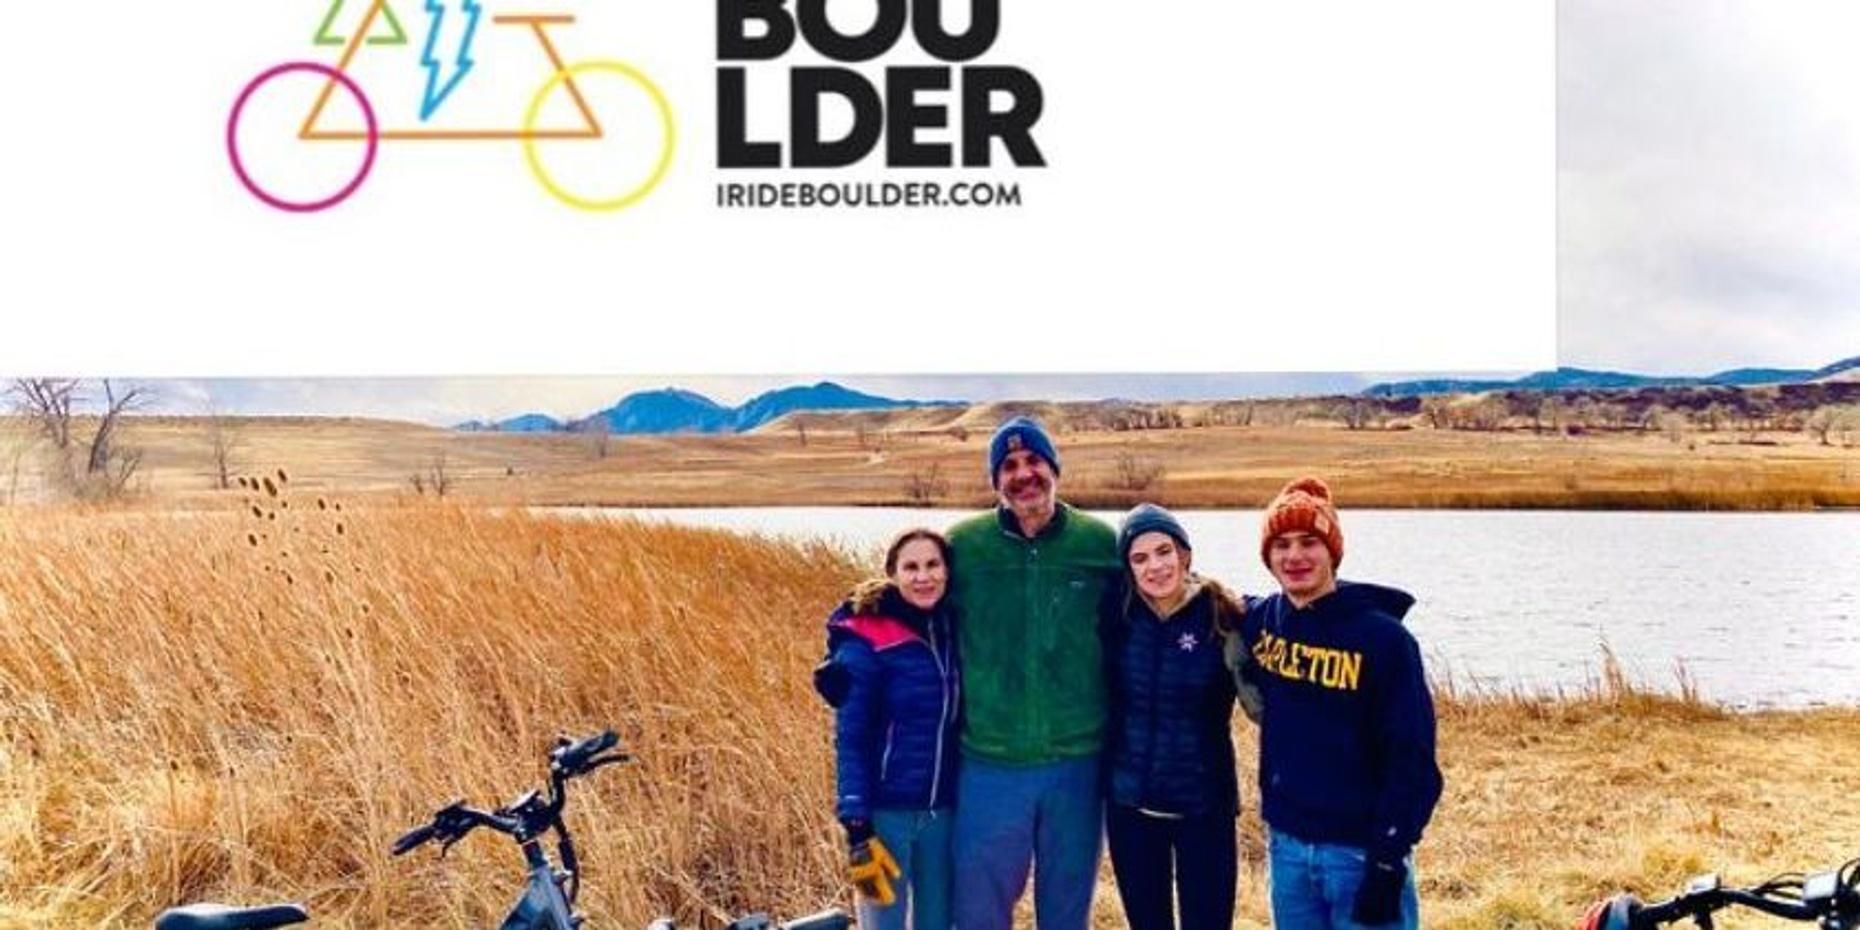 Boulder's Best Guided EBike Tour